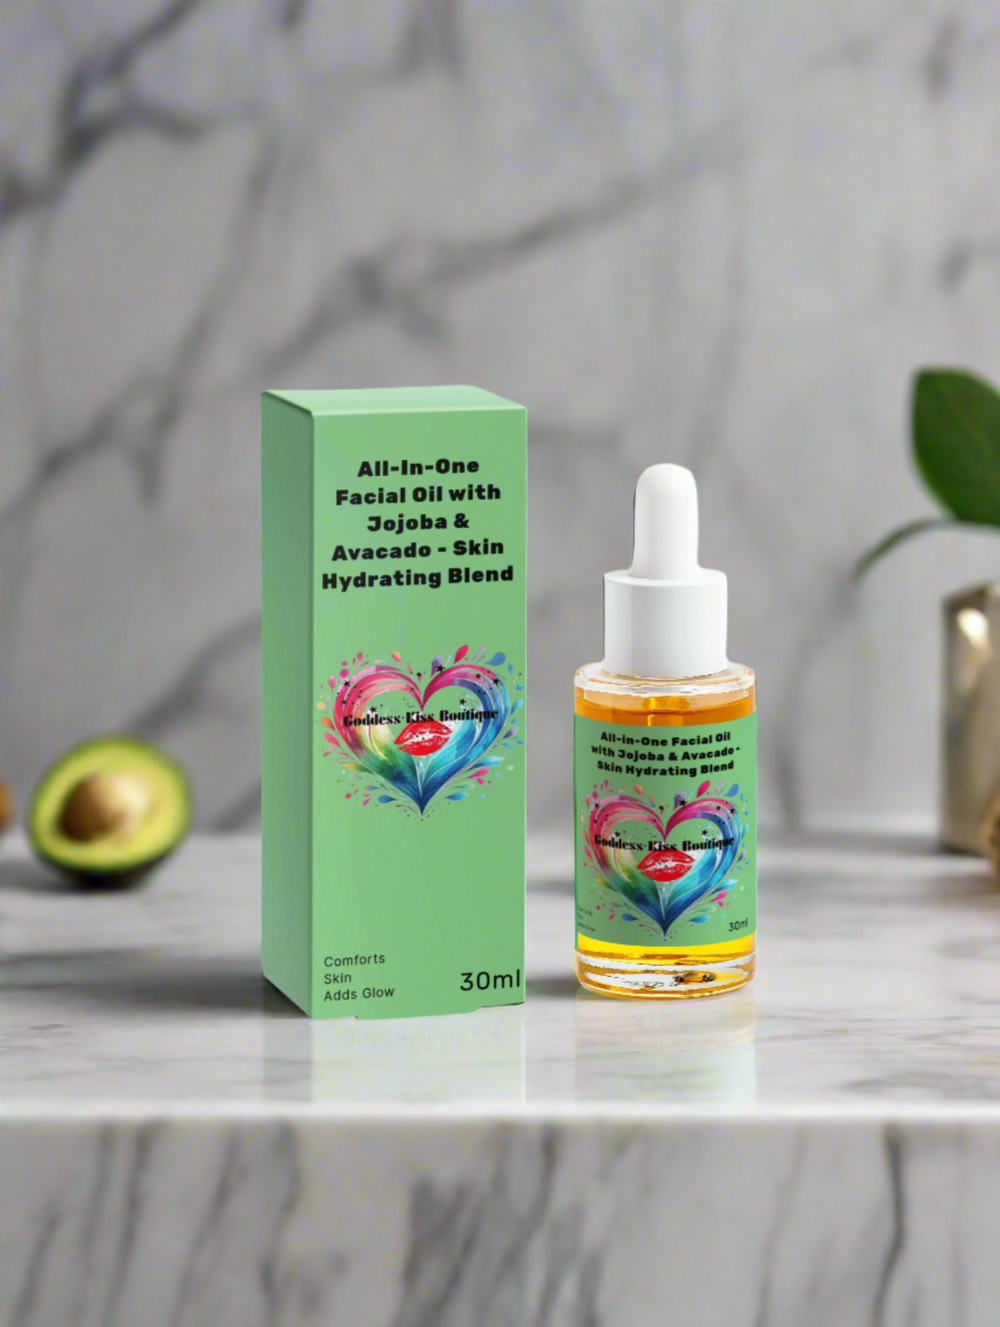 All-In-One Facial Oil with Jojoba & Avocado - Skin Hydrating Blend